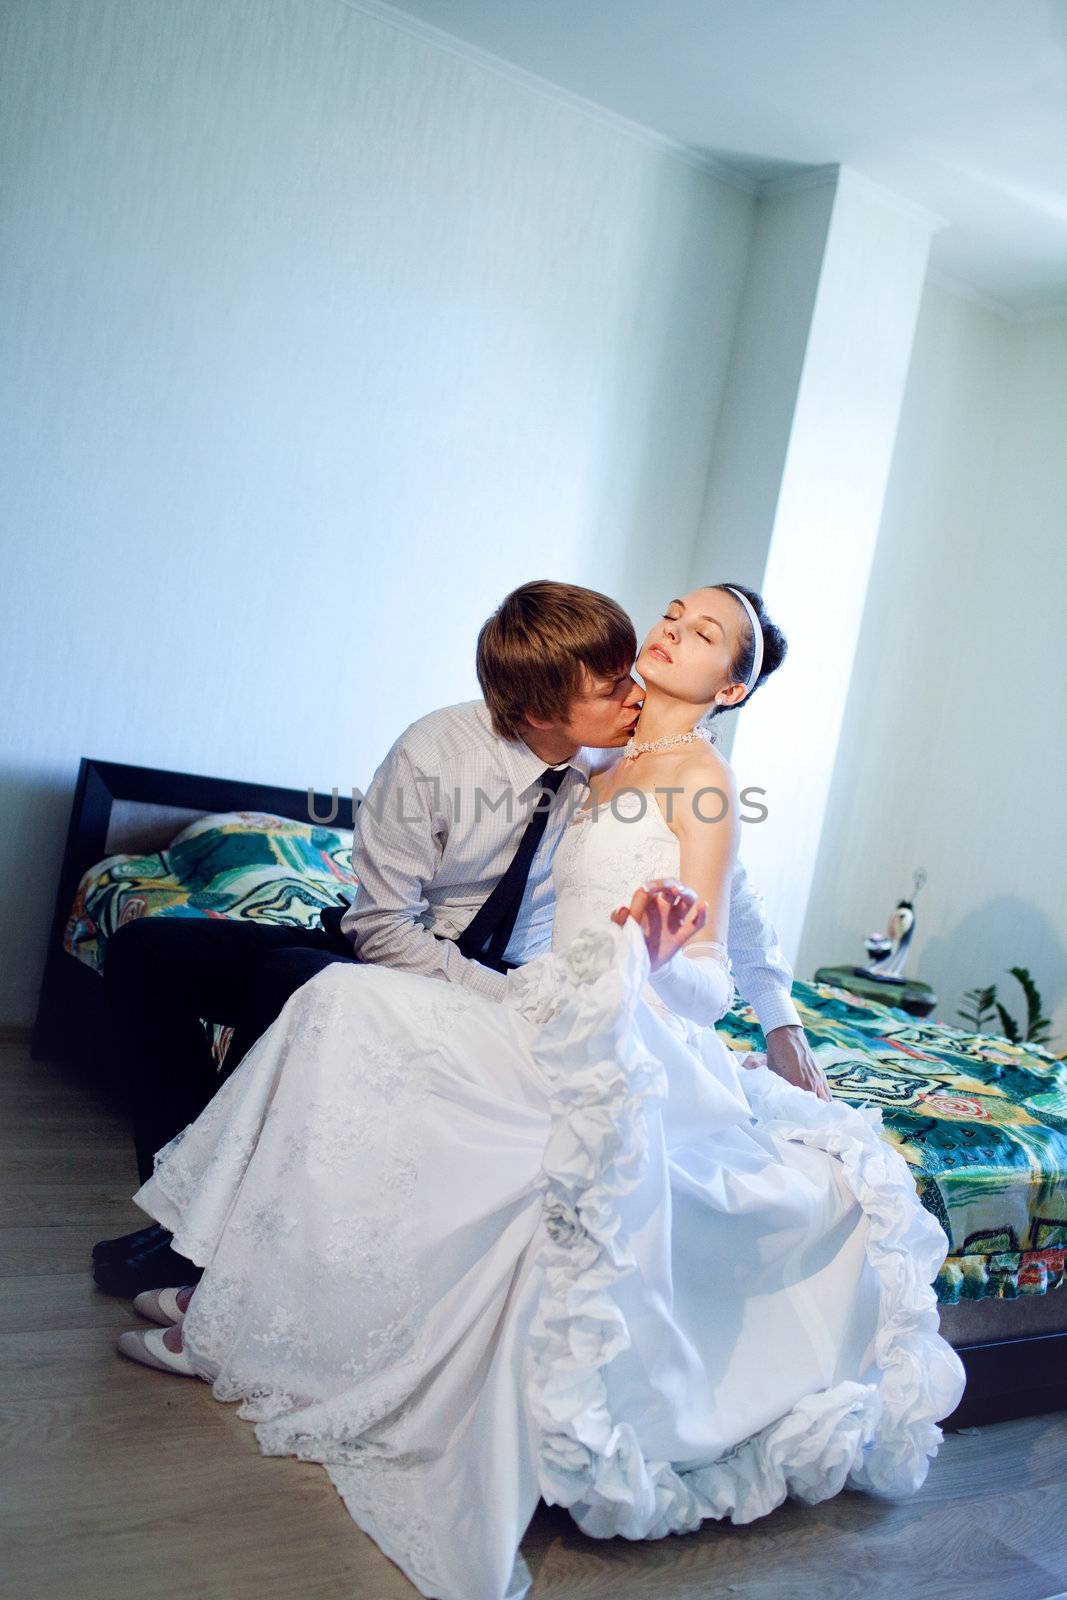 kiss on the bed of bride and groom